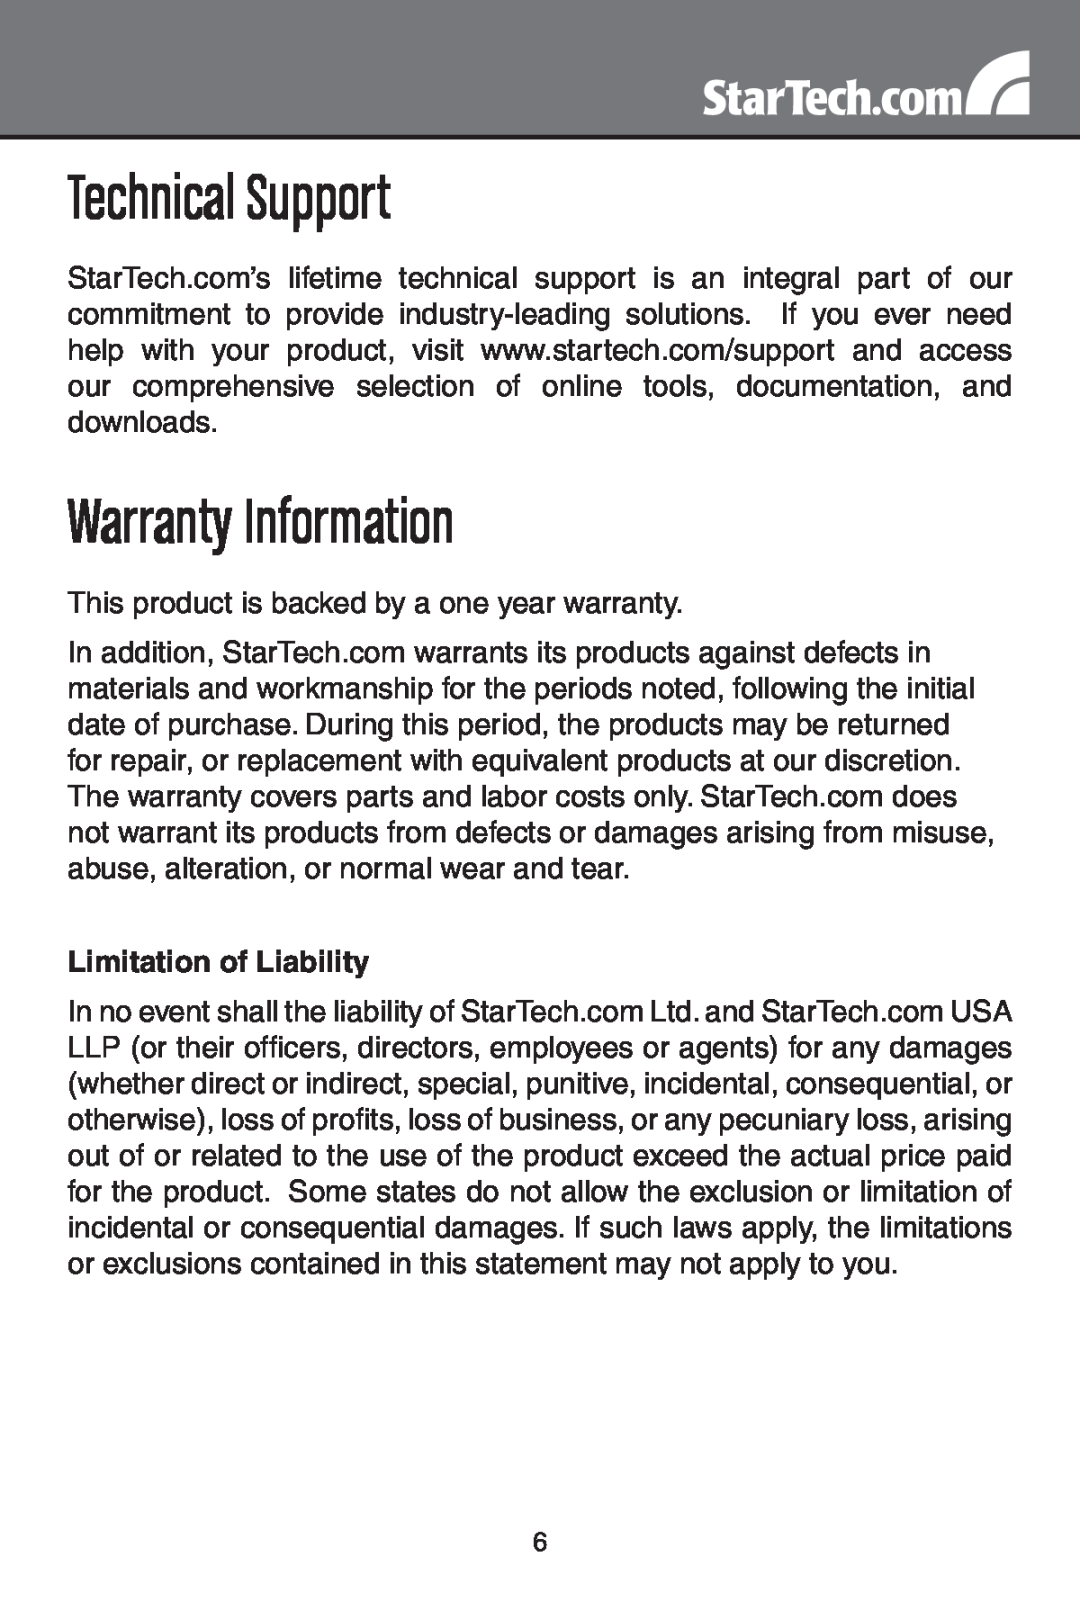 StarTech.com ICUSB422 instruction manual Technical Support, Warranty Information, Limitation of Liability 